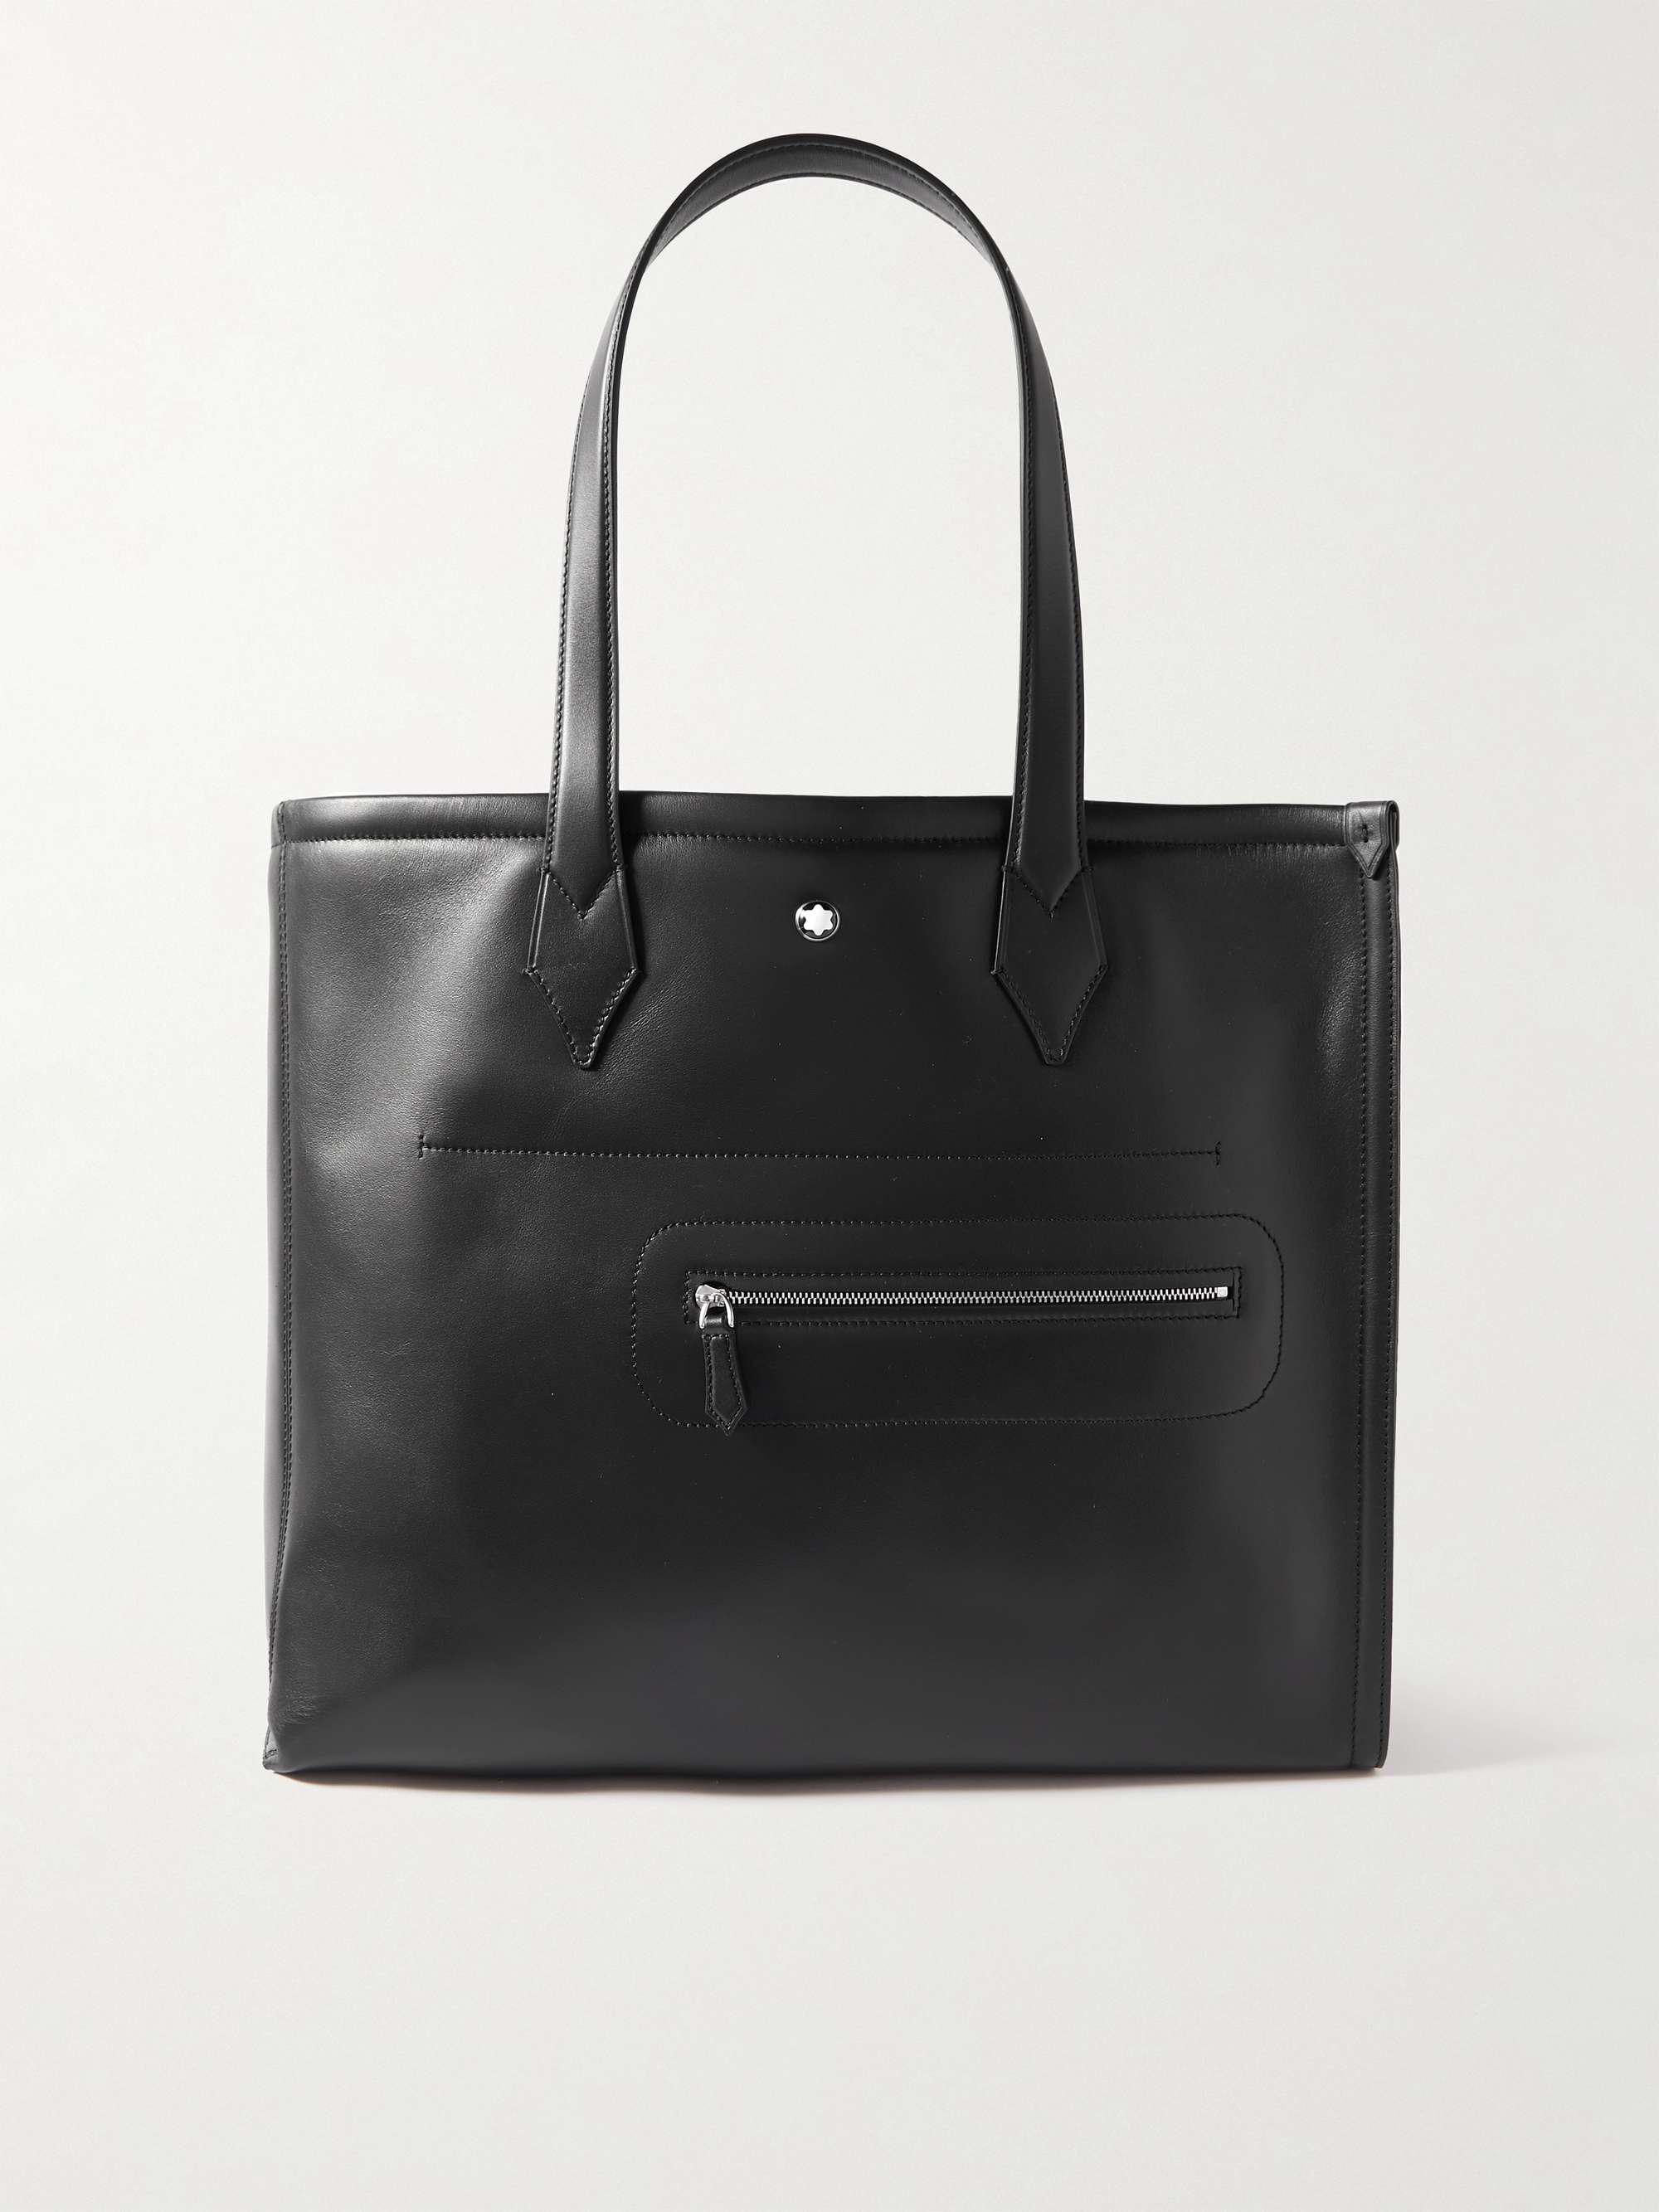 MONTBLANC Meisterstück Selection Leather Tote Bag